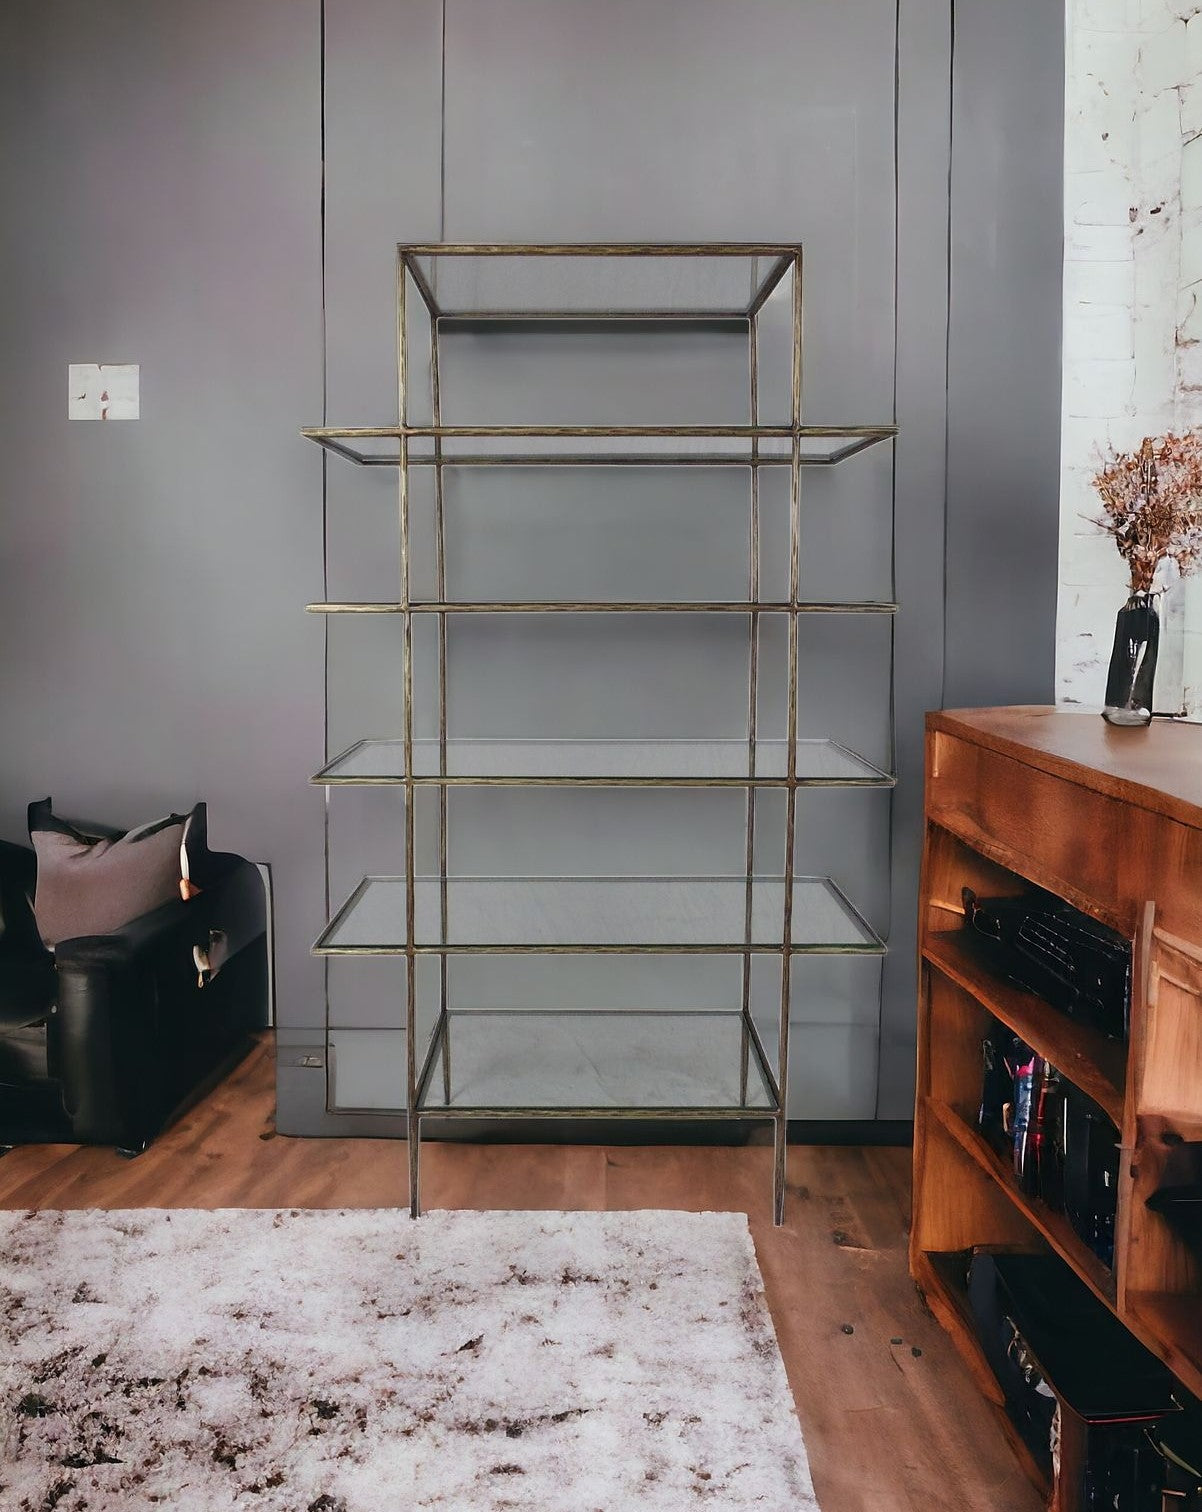 59" Iron and Glass Five Tier Etagere Bookcase